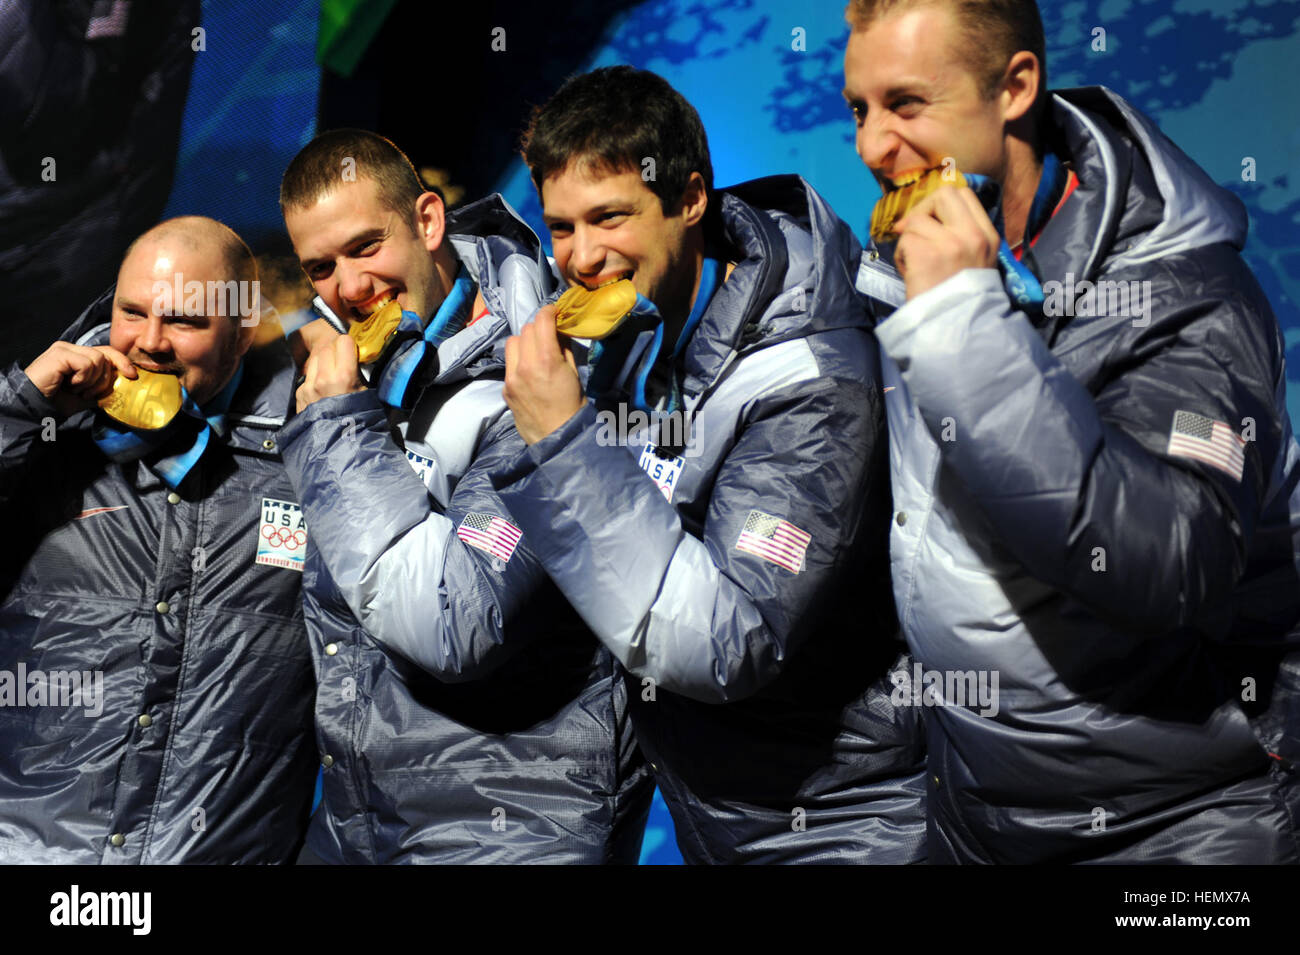 OLY1014-TeamHolcombBitesGold5663.jpg: Former U.S. Army World Class Athlete Program bobsledder Steven Holcomb and teammates Justin Olsen, Steve Mesler and Curt Tomasevicz bite their gold medals Saturday night at Whistler Medals Plaza after winning the Olympic four-man bobsled crown earlier in the day at Whistler Sliding Centre. Photo by Tim Hipps, FMWRC Public Affairs USA-1 4 man bobsleigh team with gold medals at 2010 Winter Olympics 2010-02-27 Stock Photo